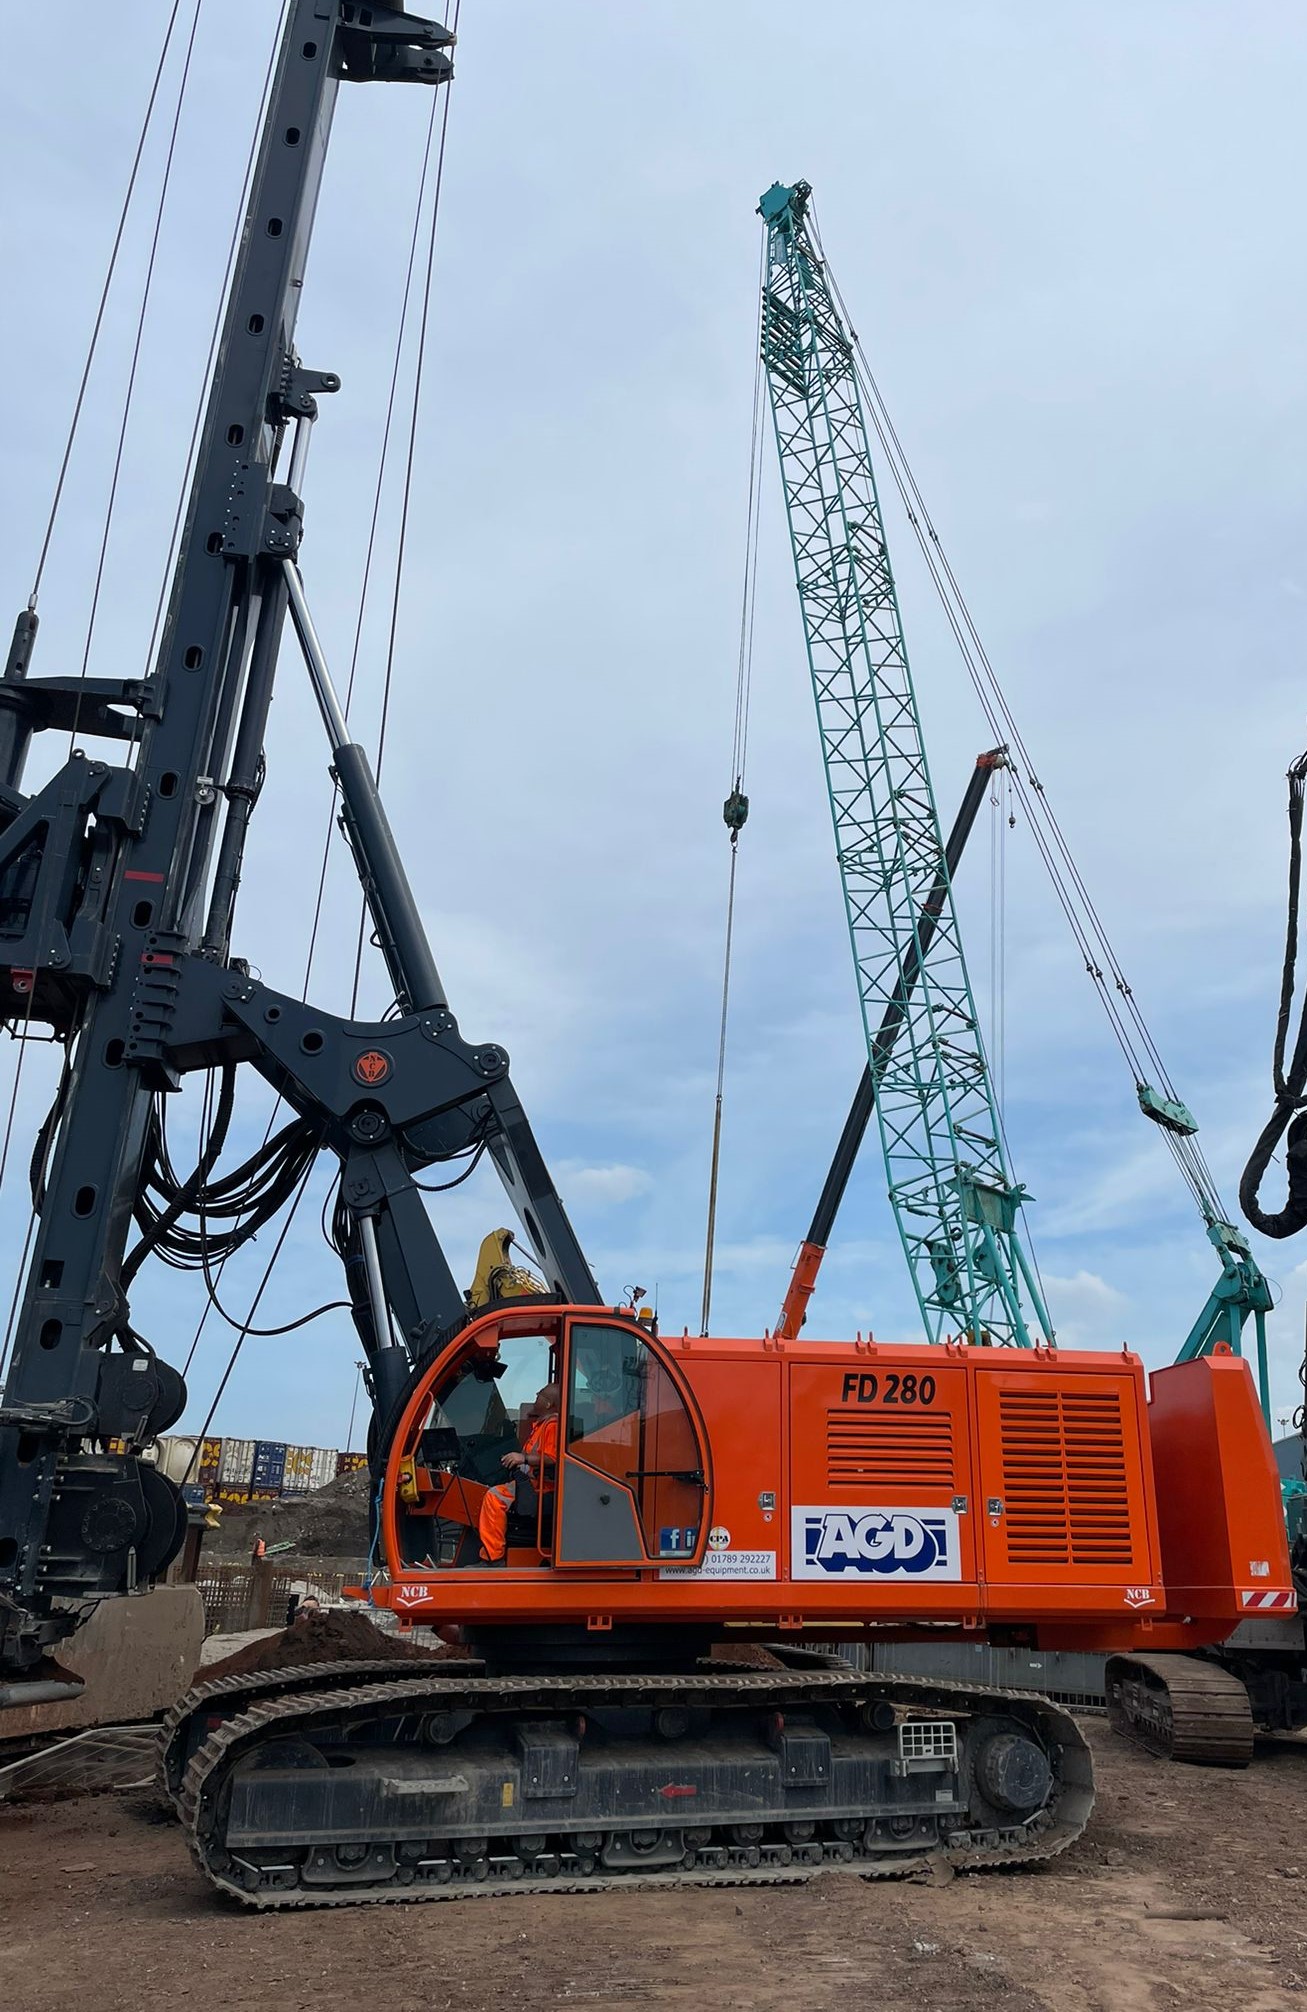 UK Suppliers of Interlocking Kelly Bars Piling Rig Hire